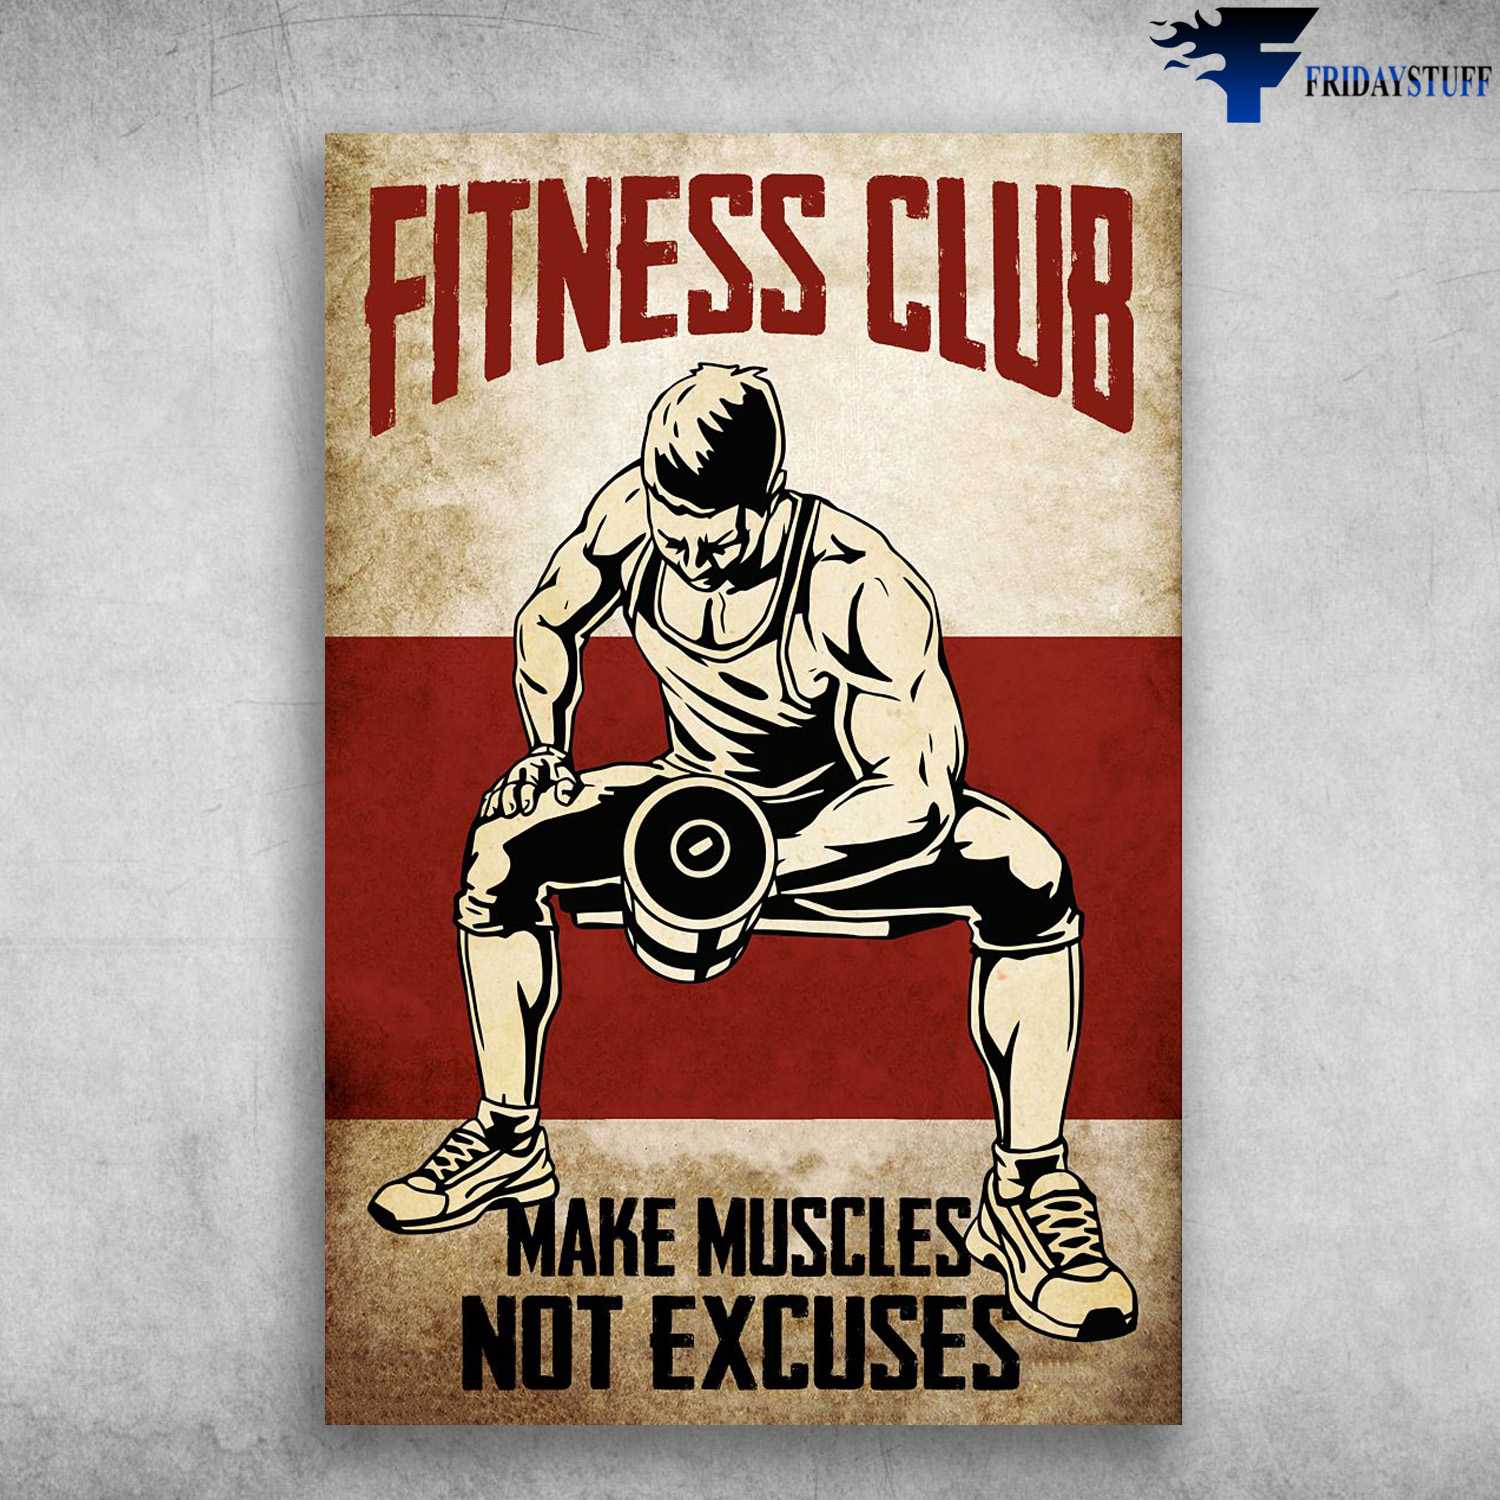 Gym Room, Gym Poster, Weightlifting Man, Fitness Club, Make Muscles, Not Excuses